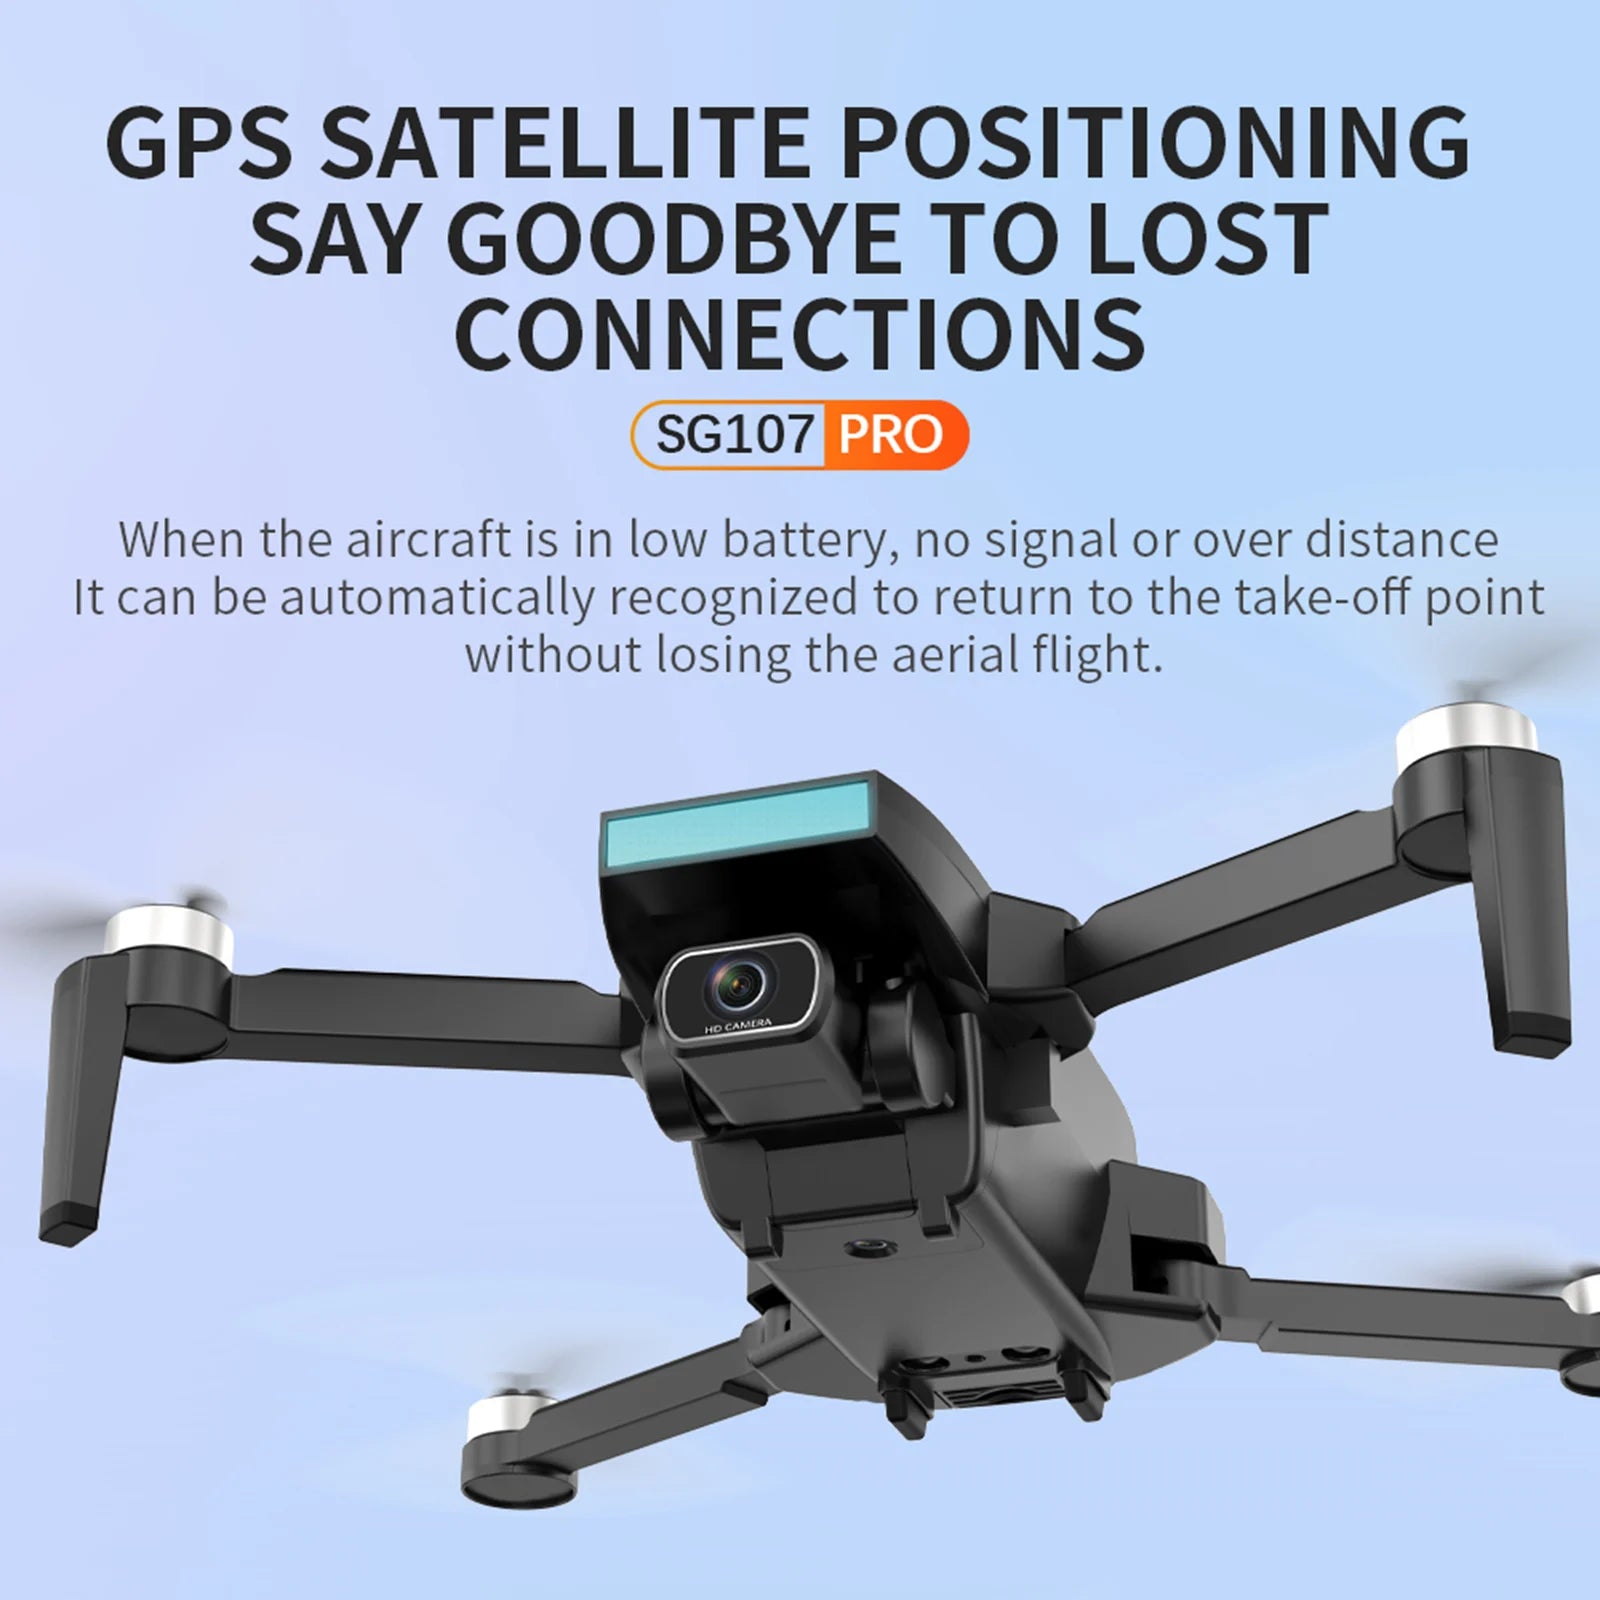 ZLL SG107 Pro Drone, GPS SATELLITE POSITIONING SAY GOODB